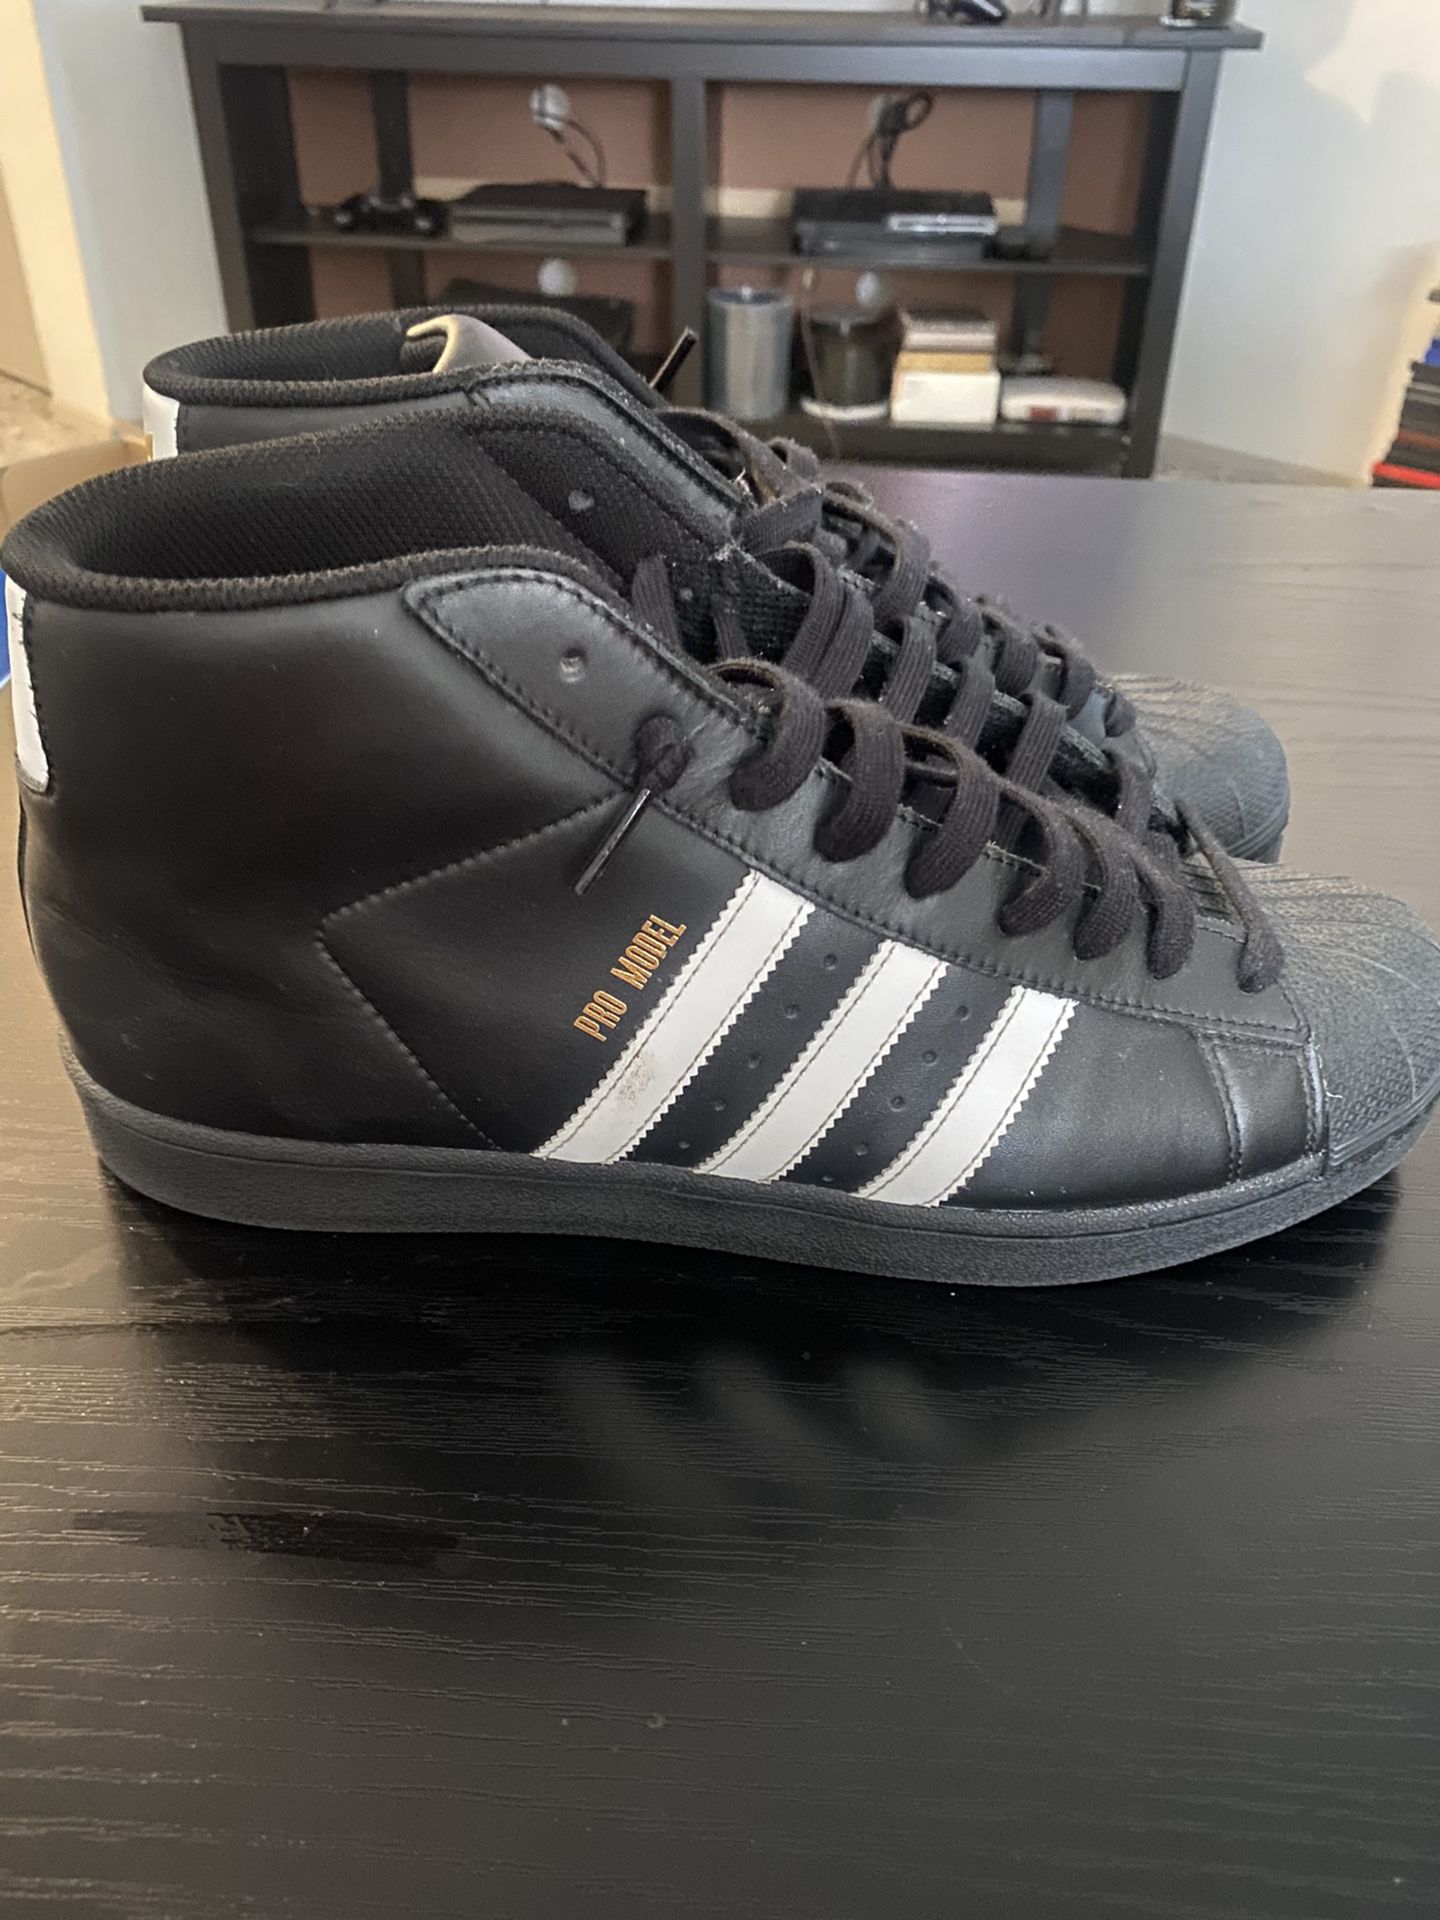 Adidas size 10 $55 obo cash only no trades